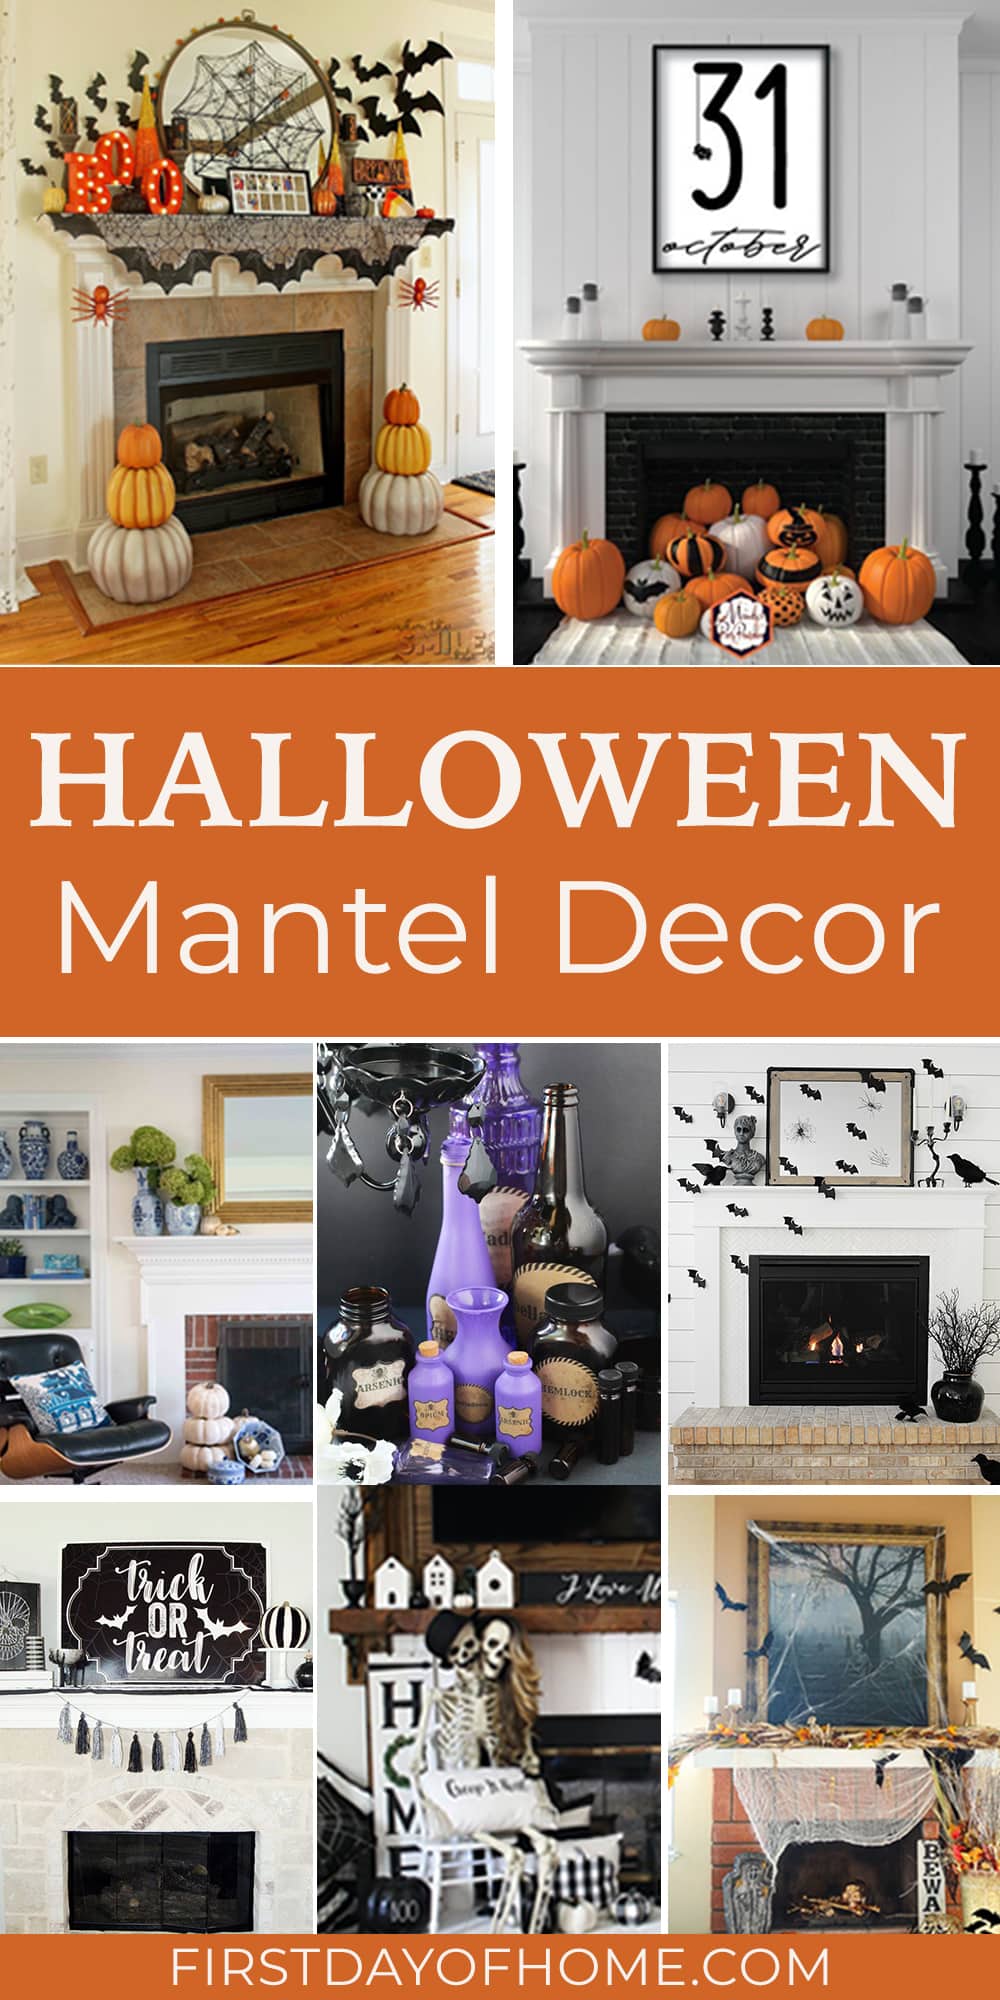 Collage of Halloween mantel decorations